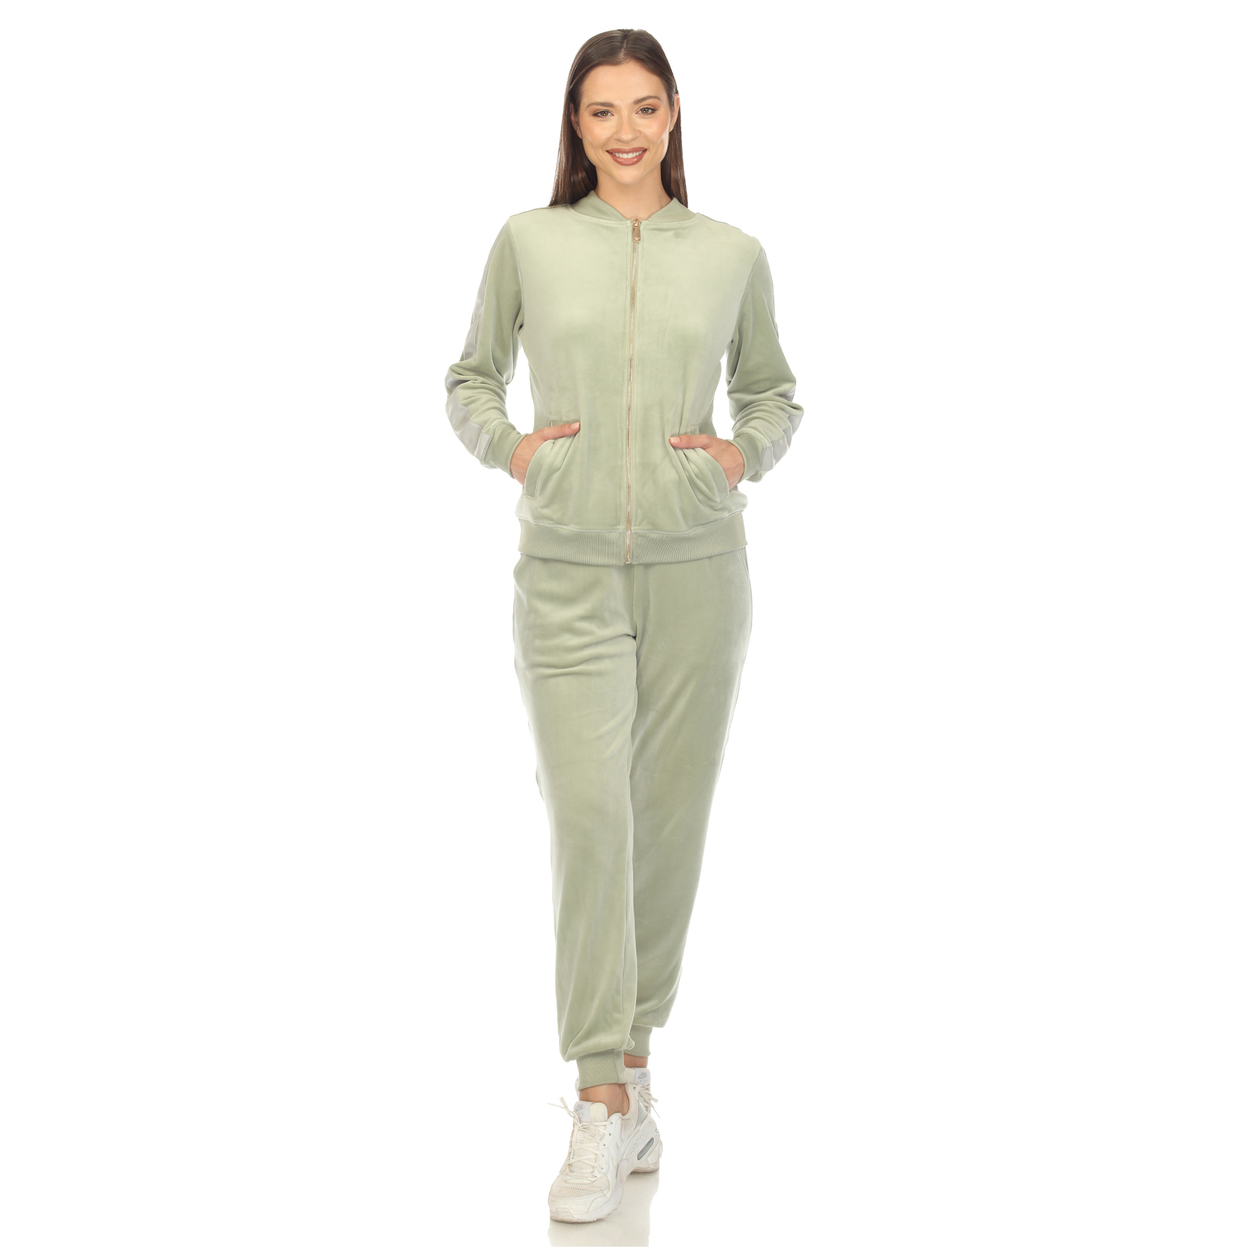 White Mark Women's 2-Piece Velour Tracksuit Set With Faux Leather Stripe - Sage, Small